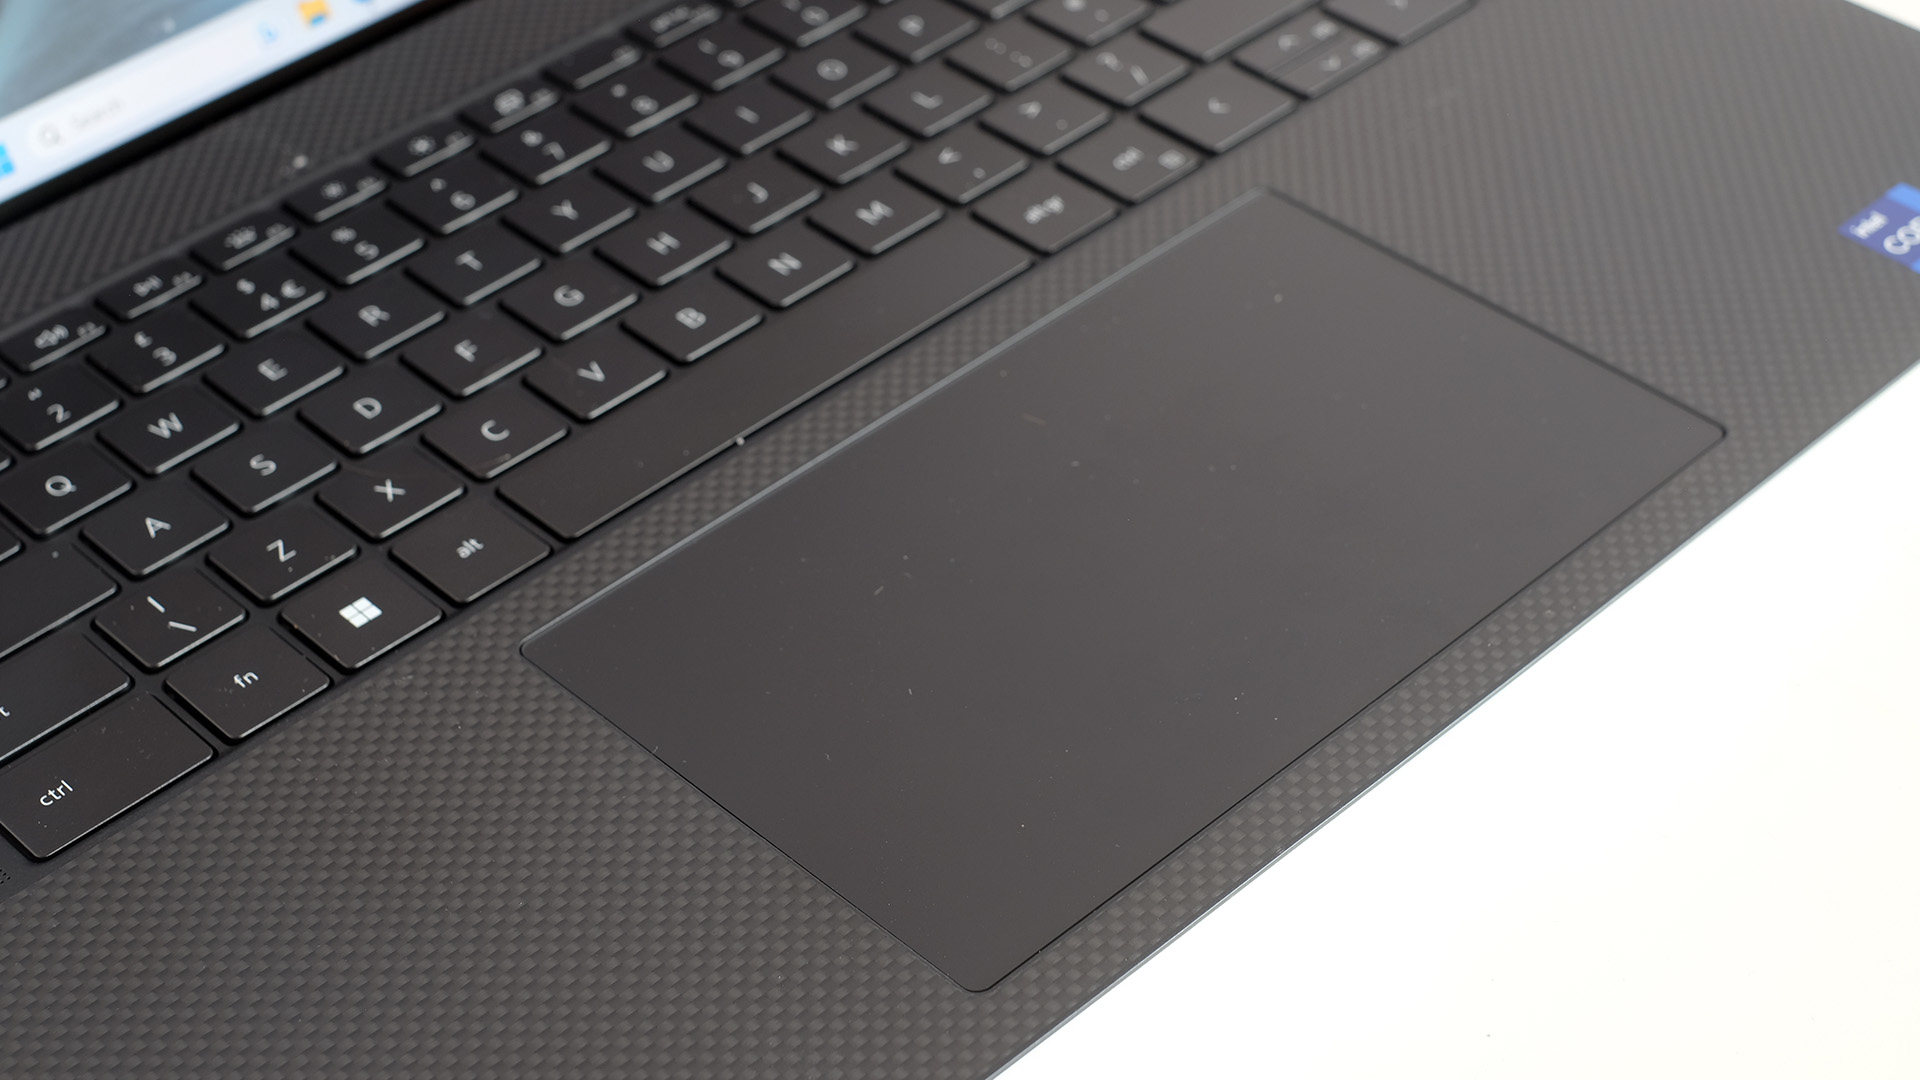 Dell XPS 17 trackpad.